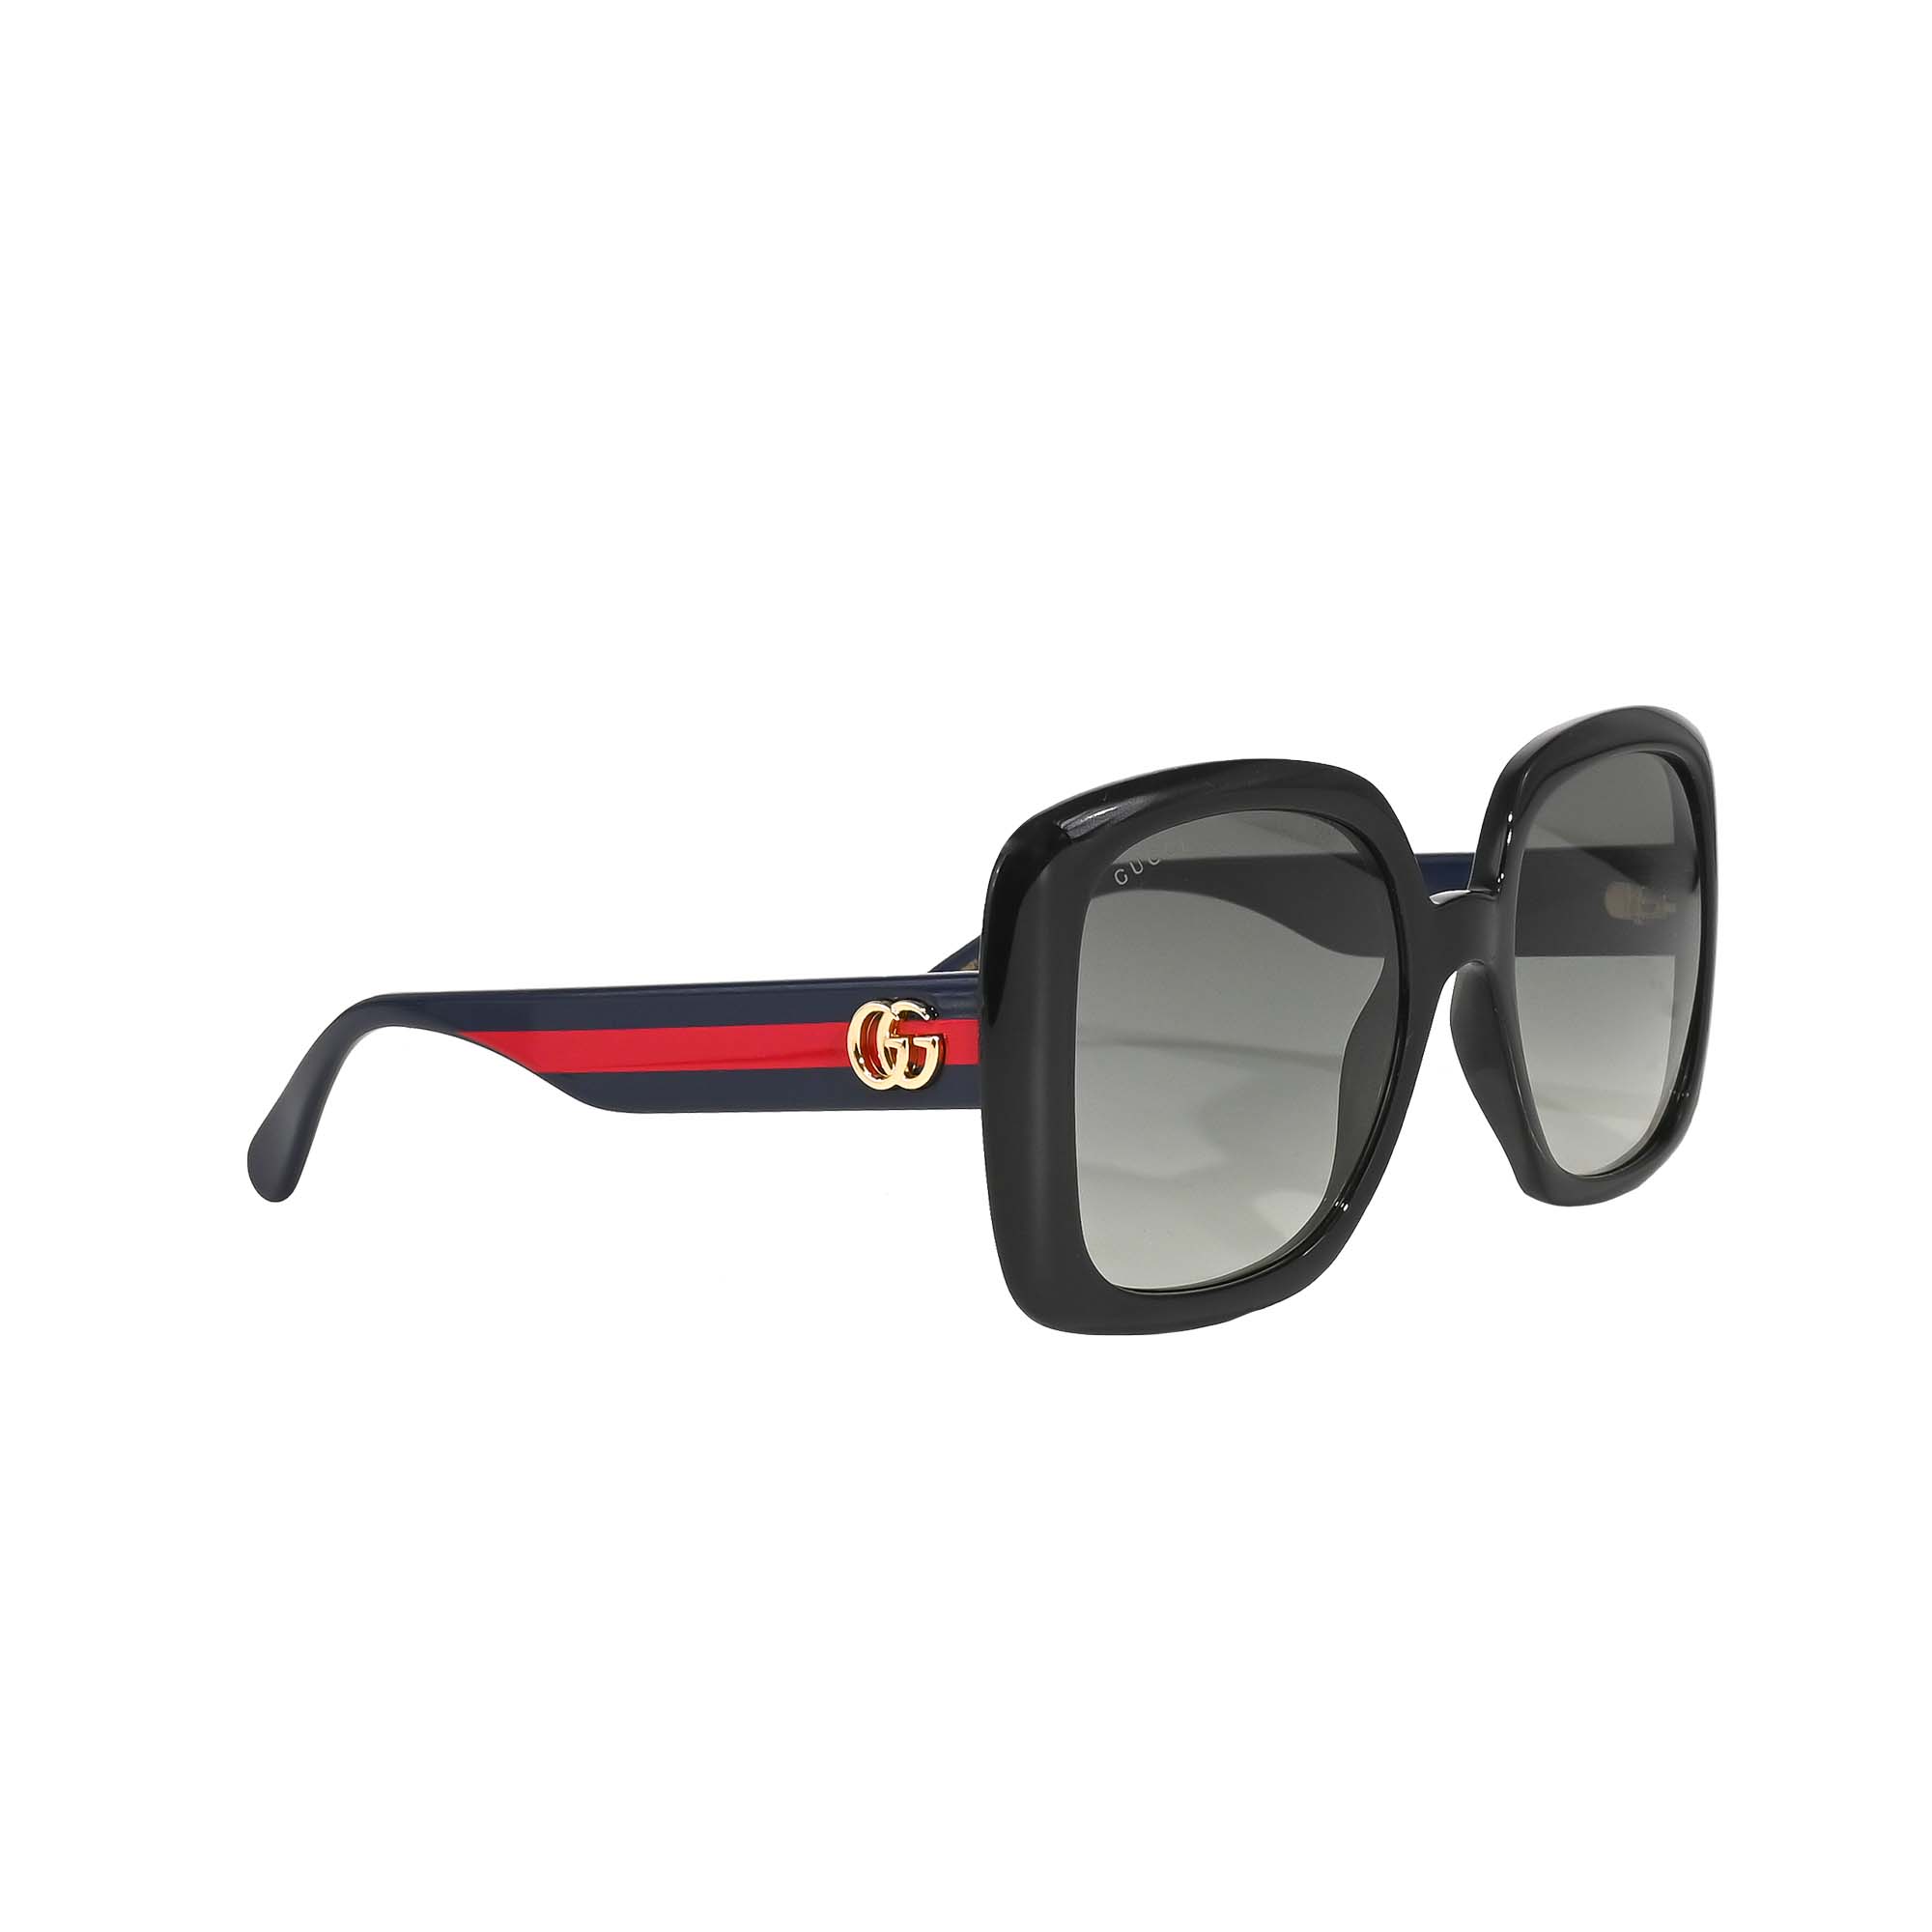 Gucci Women's Grey Lens Oversized Sunglasses - GG0713S-001 - image 2 of 3